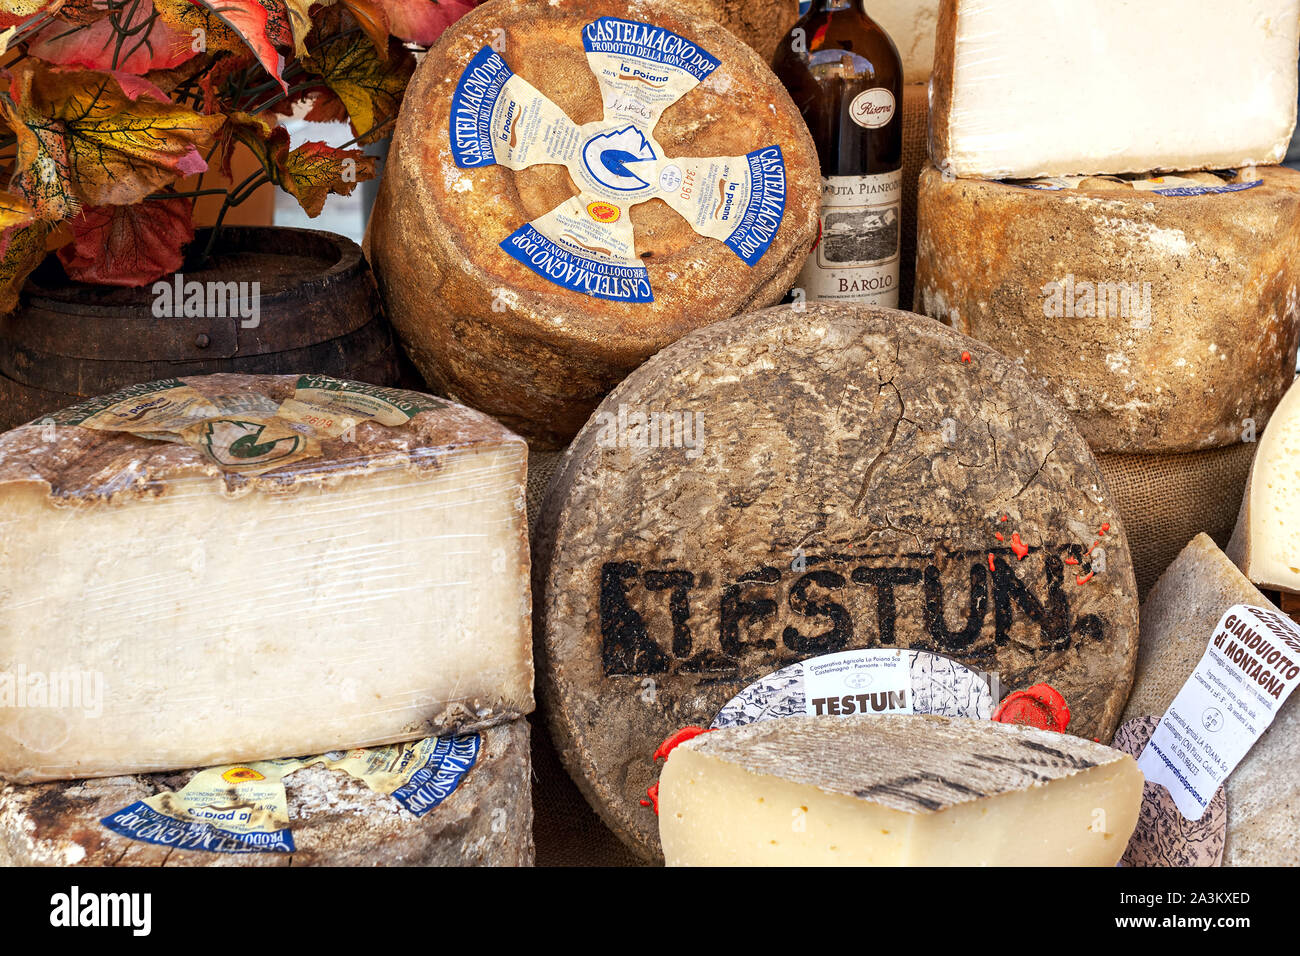 Different types of hard artisan cheese at the market in old town during famous annual White Truffle festival in Alba, Italy. Stock Photo